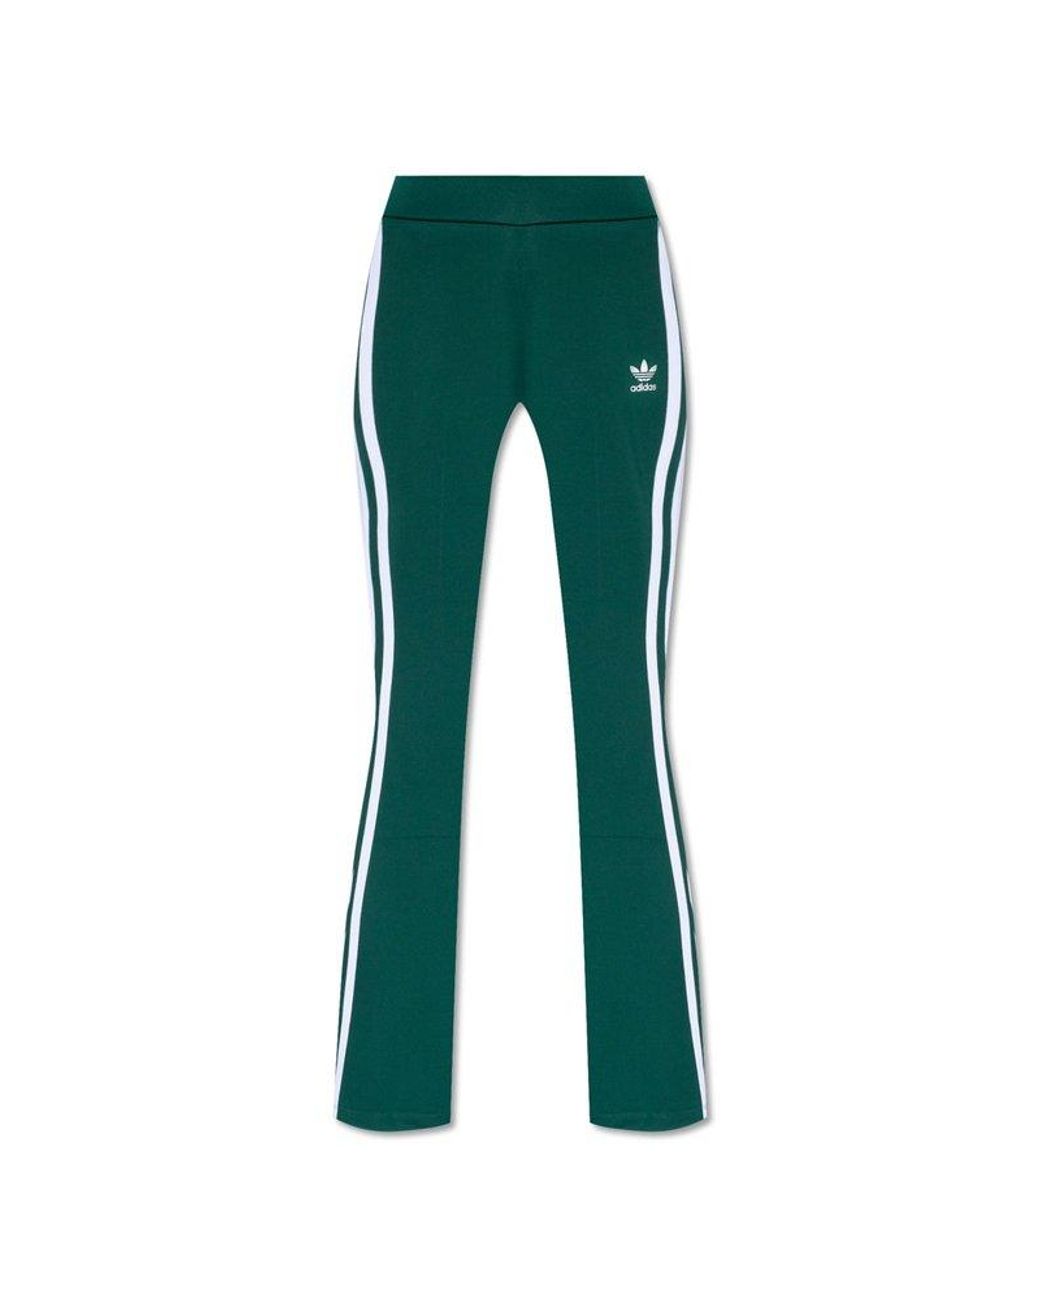 adidas Originals Flared Trousers, in Green